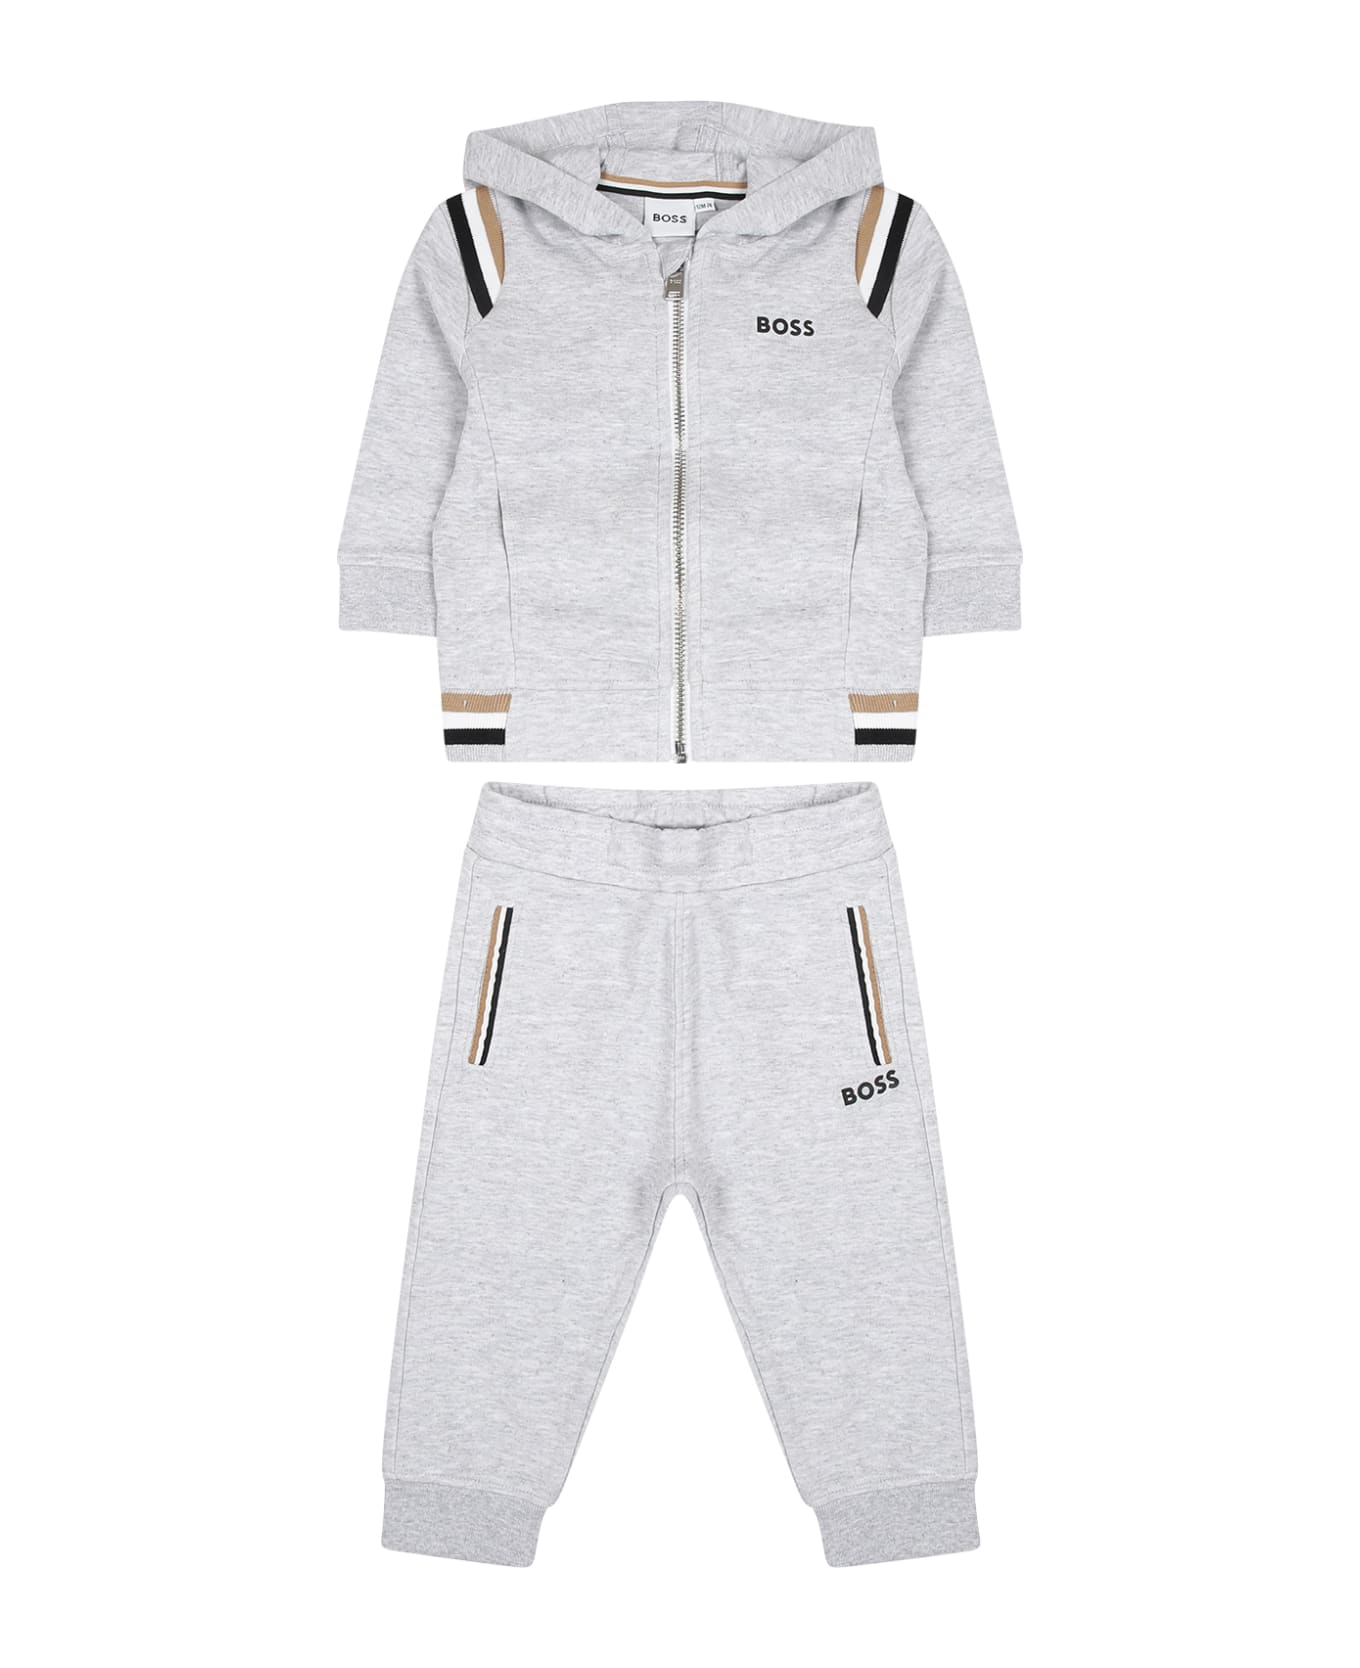 Hugo Boss Grey Suiit For Baby Boy With Logo - Grey ボトムス